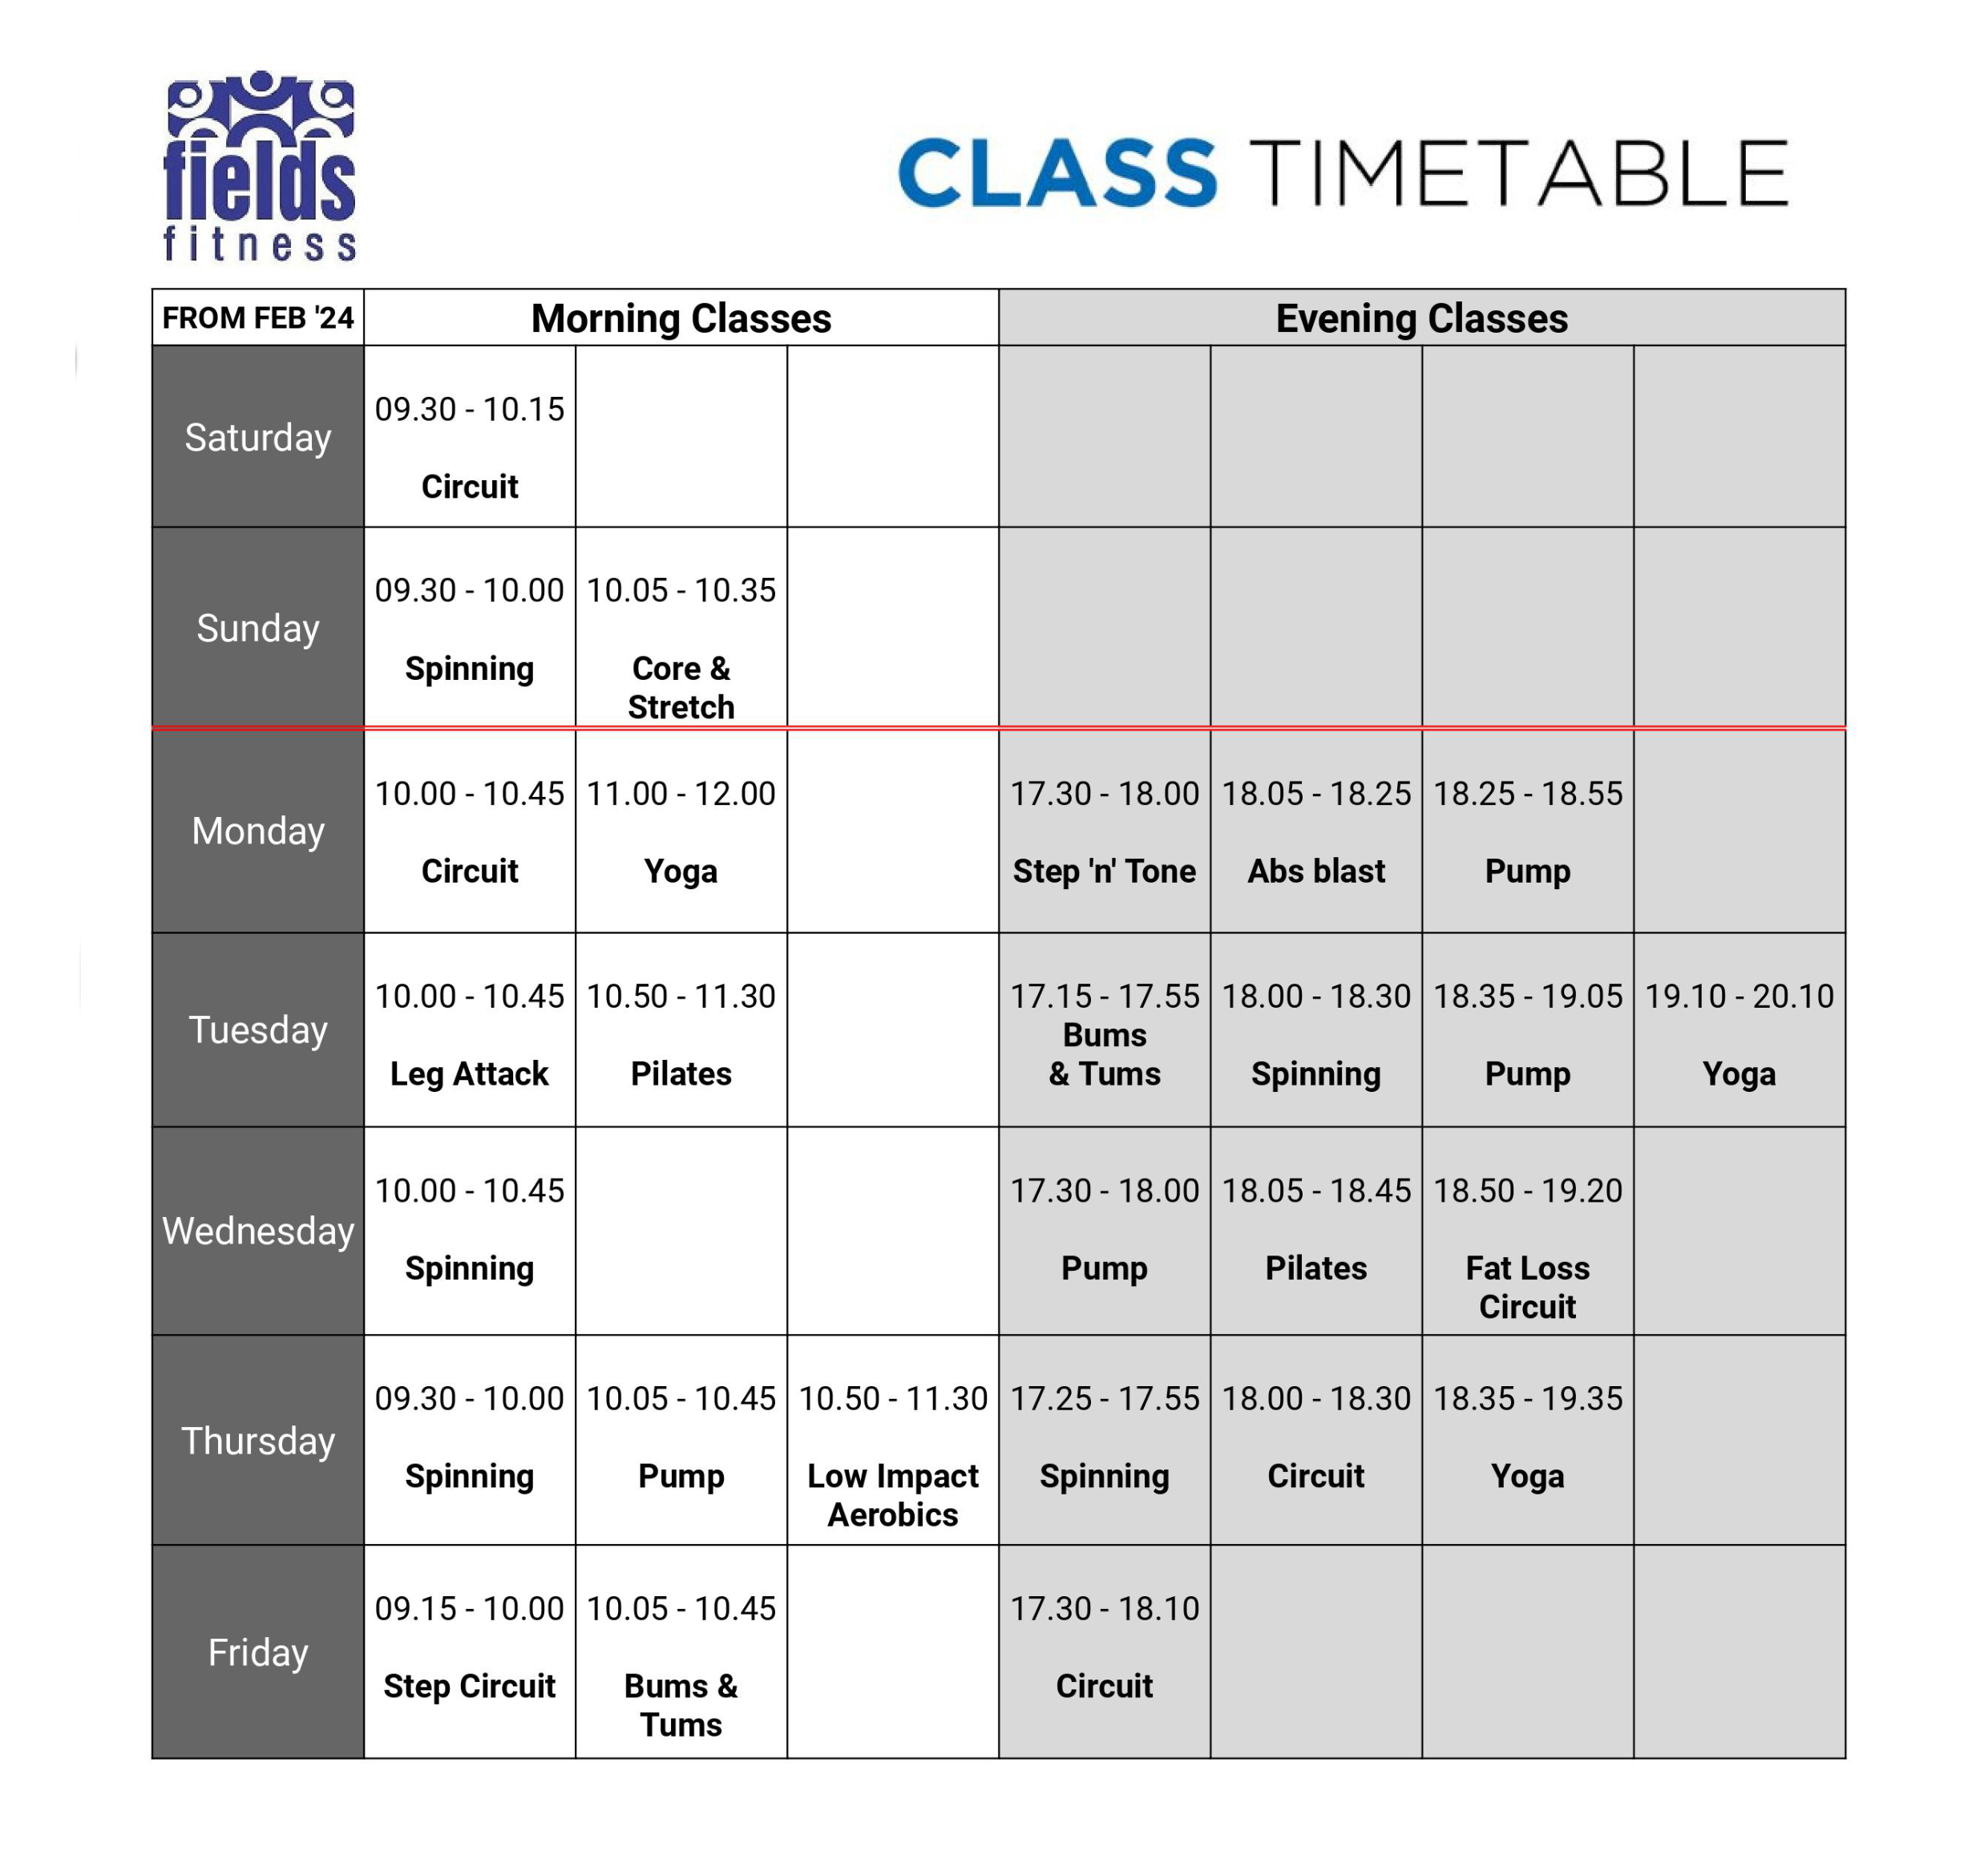 Fields Fitness Class Timetable